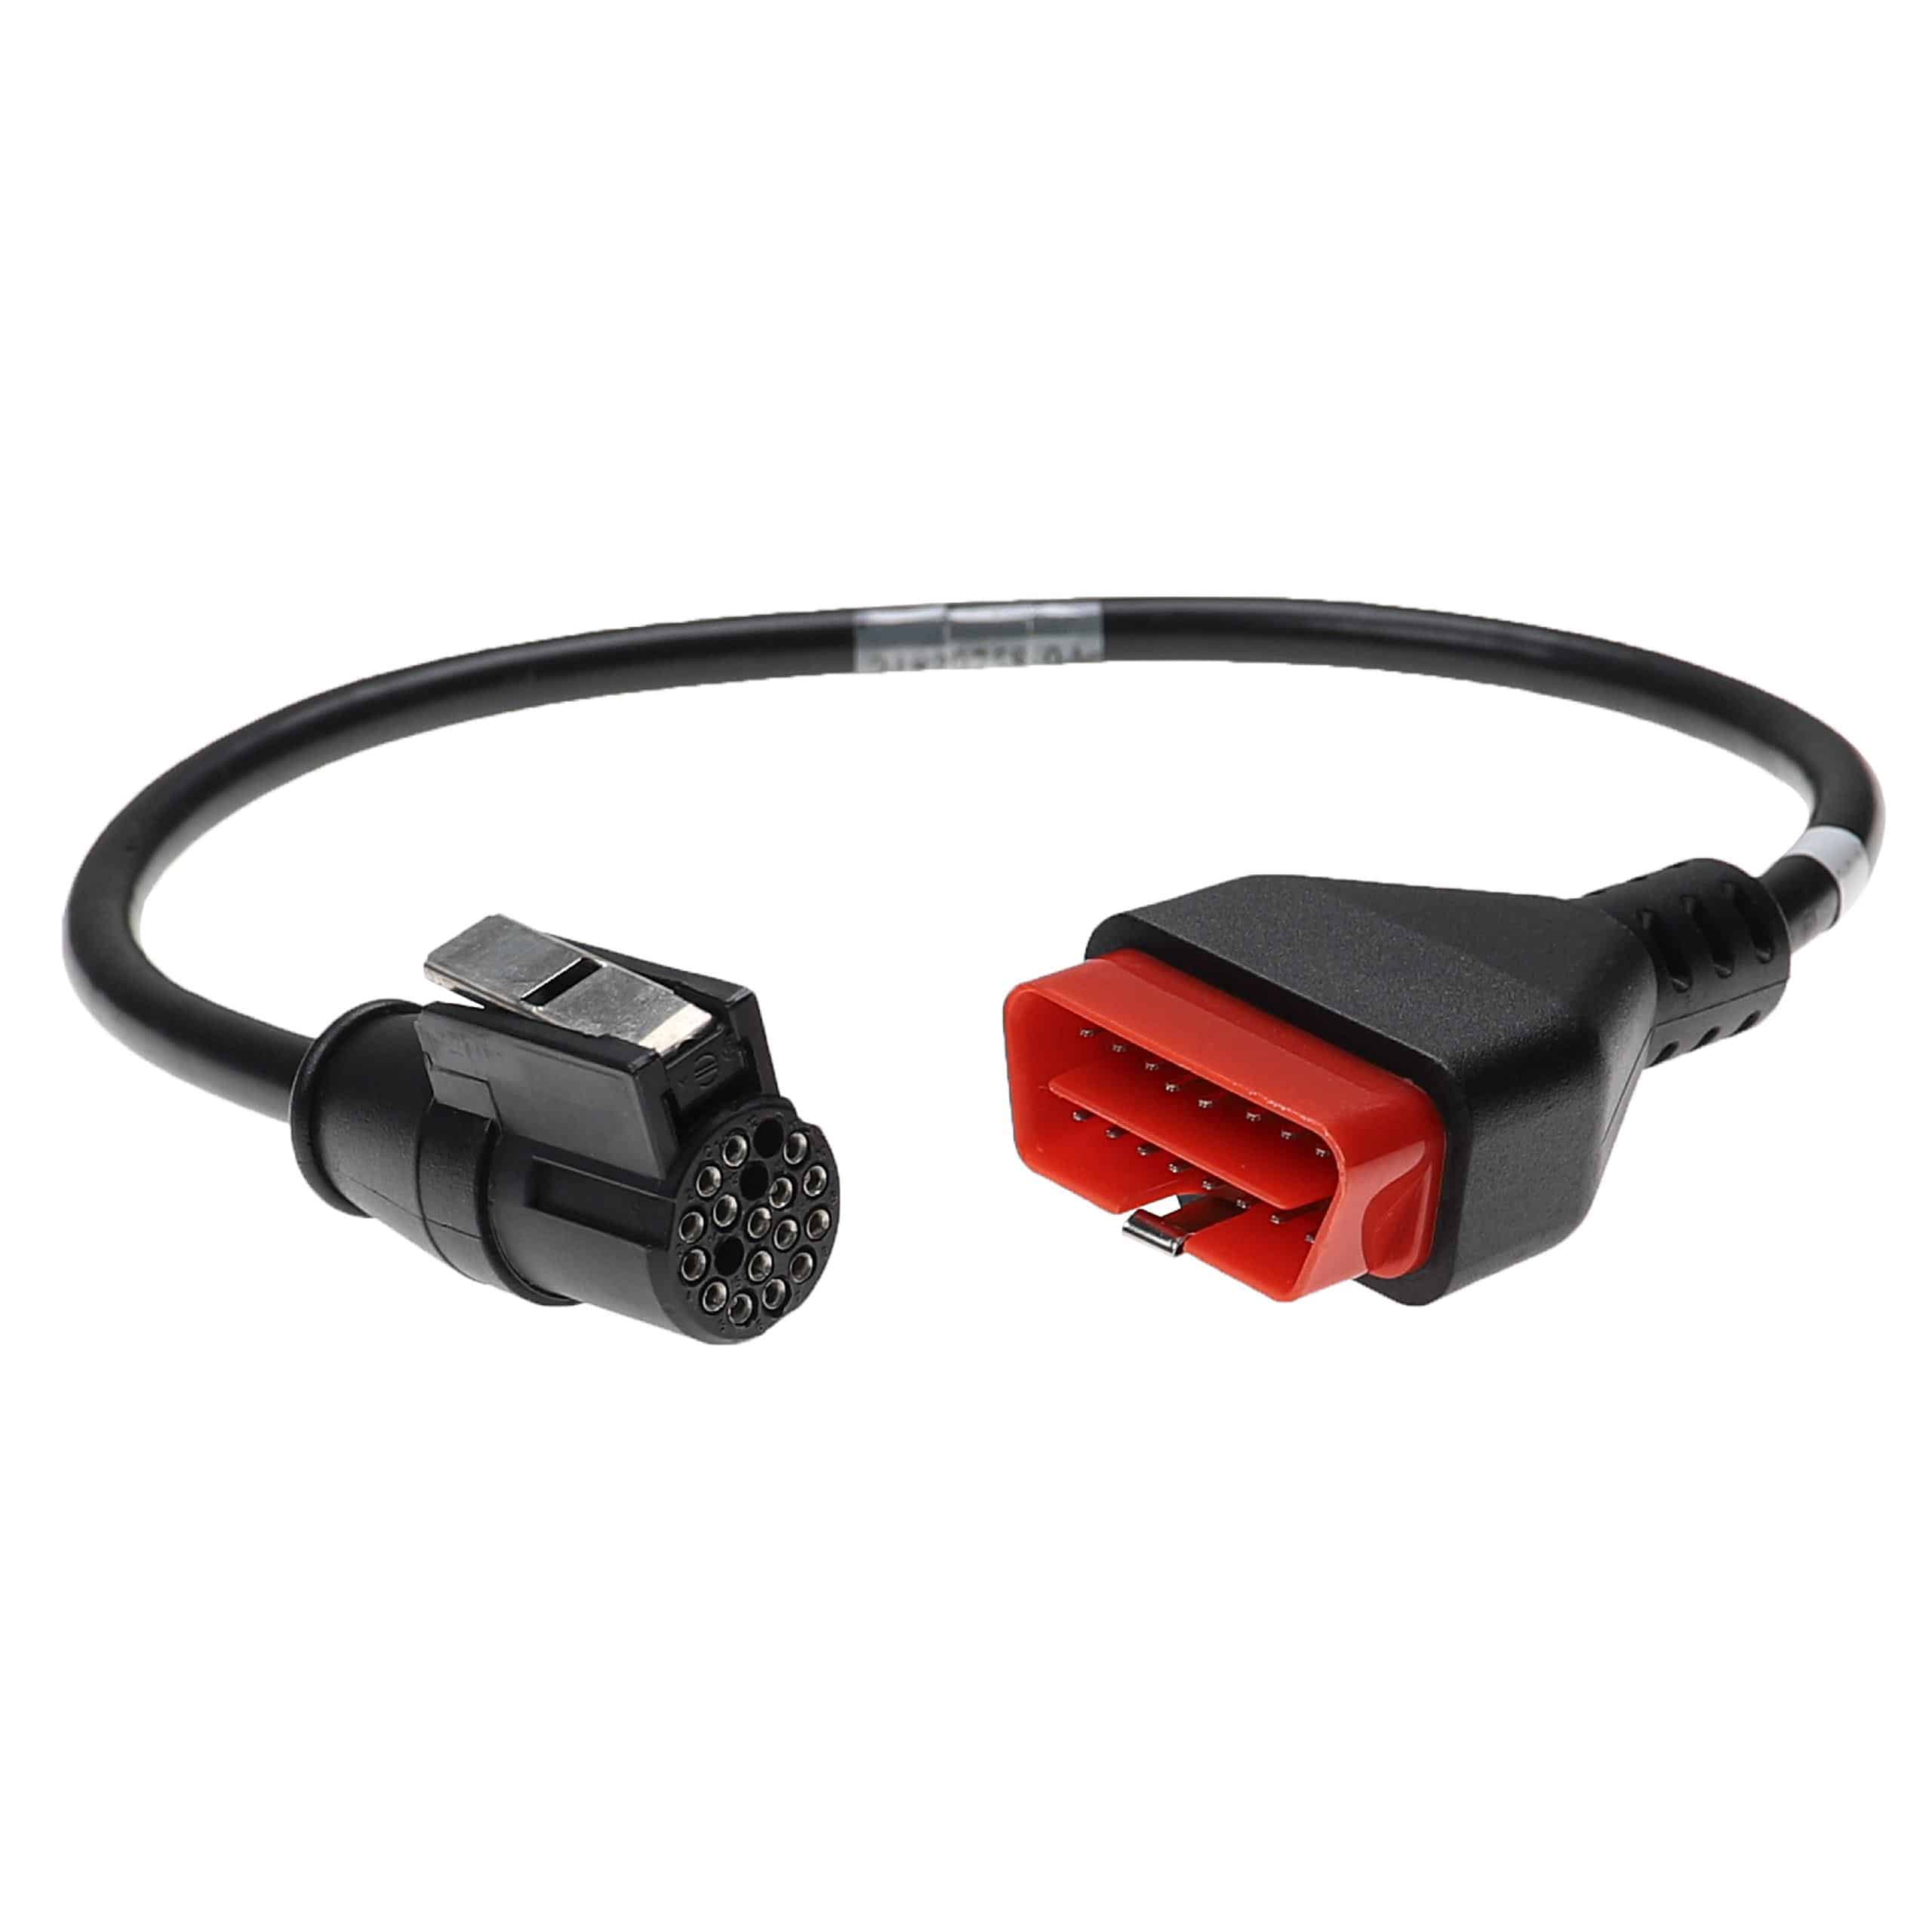 vhbw OBD2 Adapter can clip 19 pin to OBD2 16 pin std socket suitable for , Renault, Dacia - 54 cm